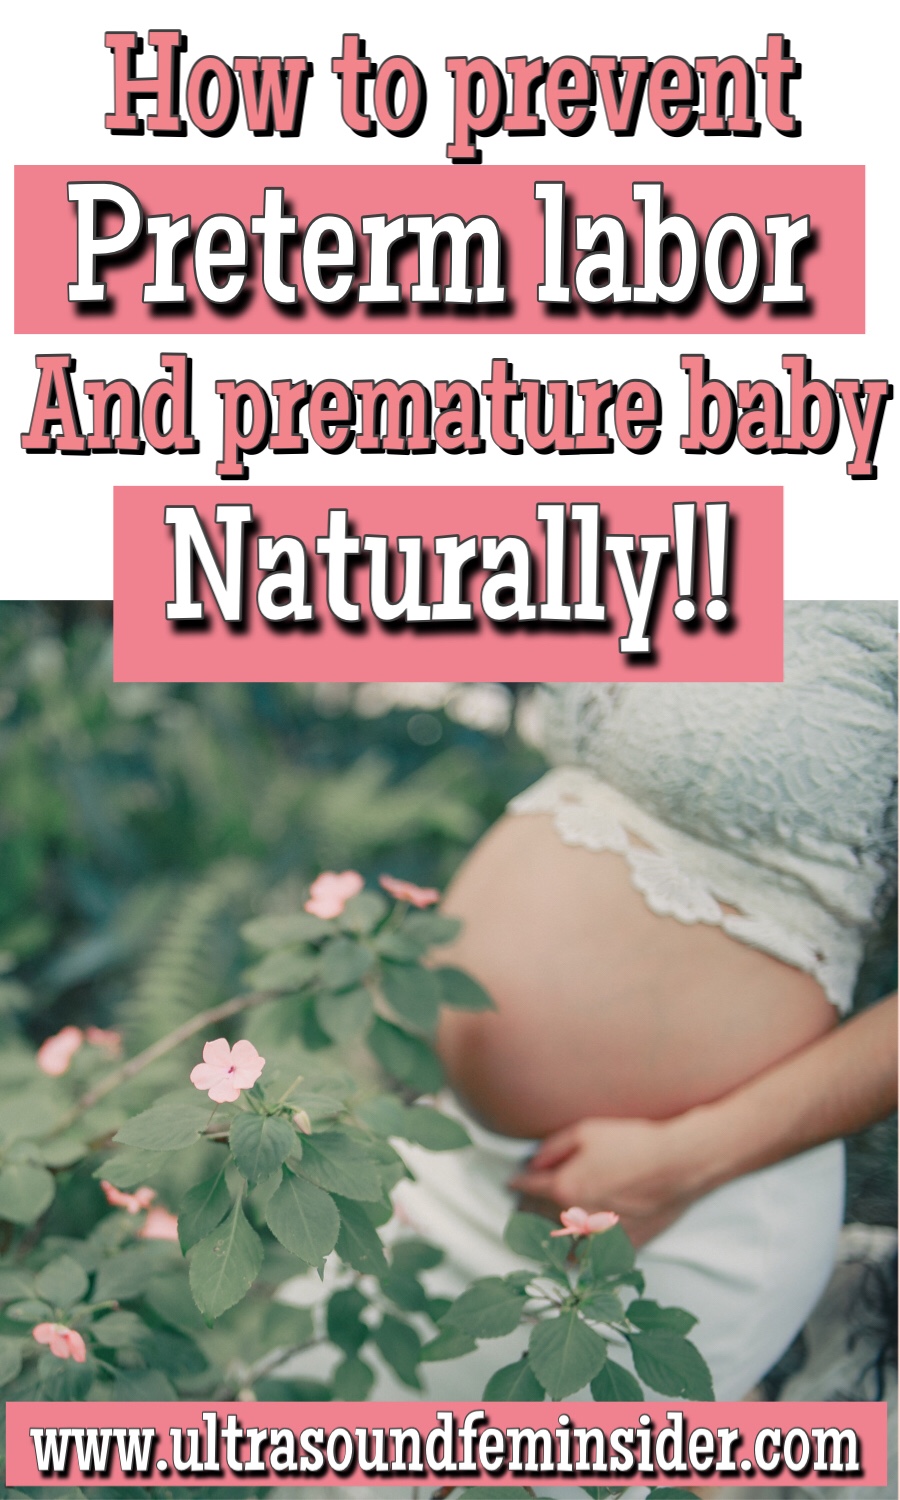 how to prevent having a premature baby naturally.